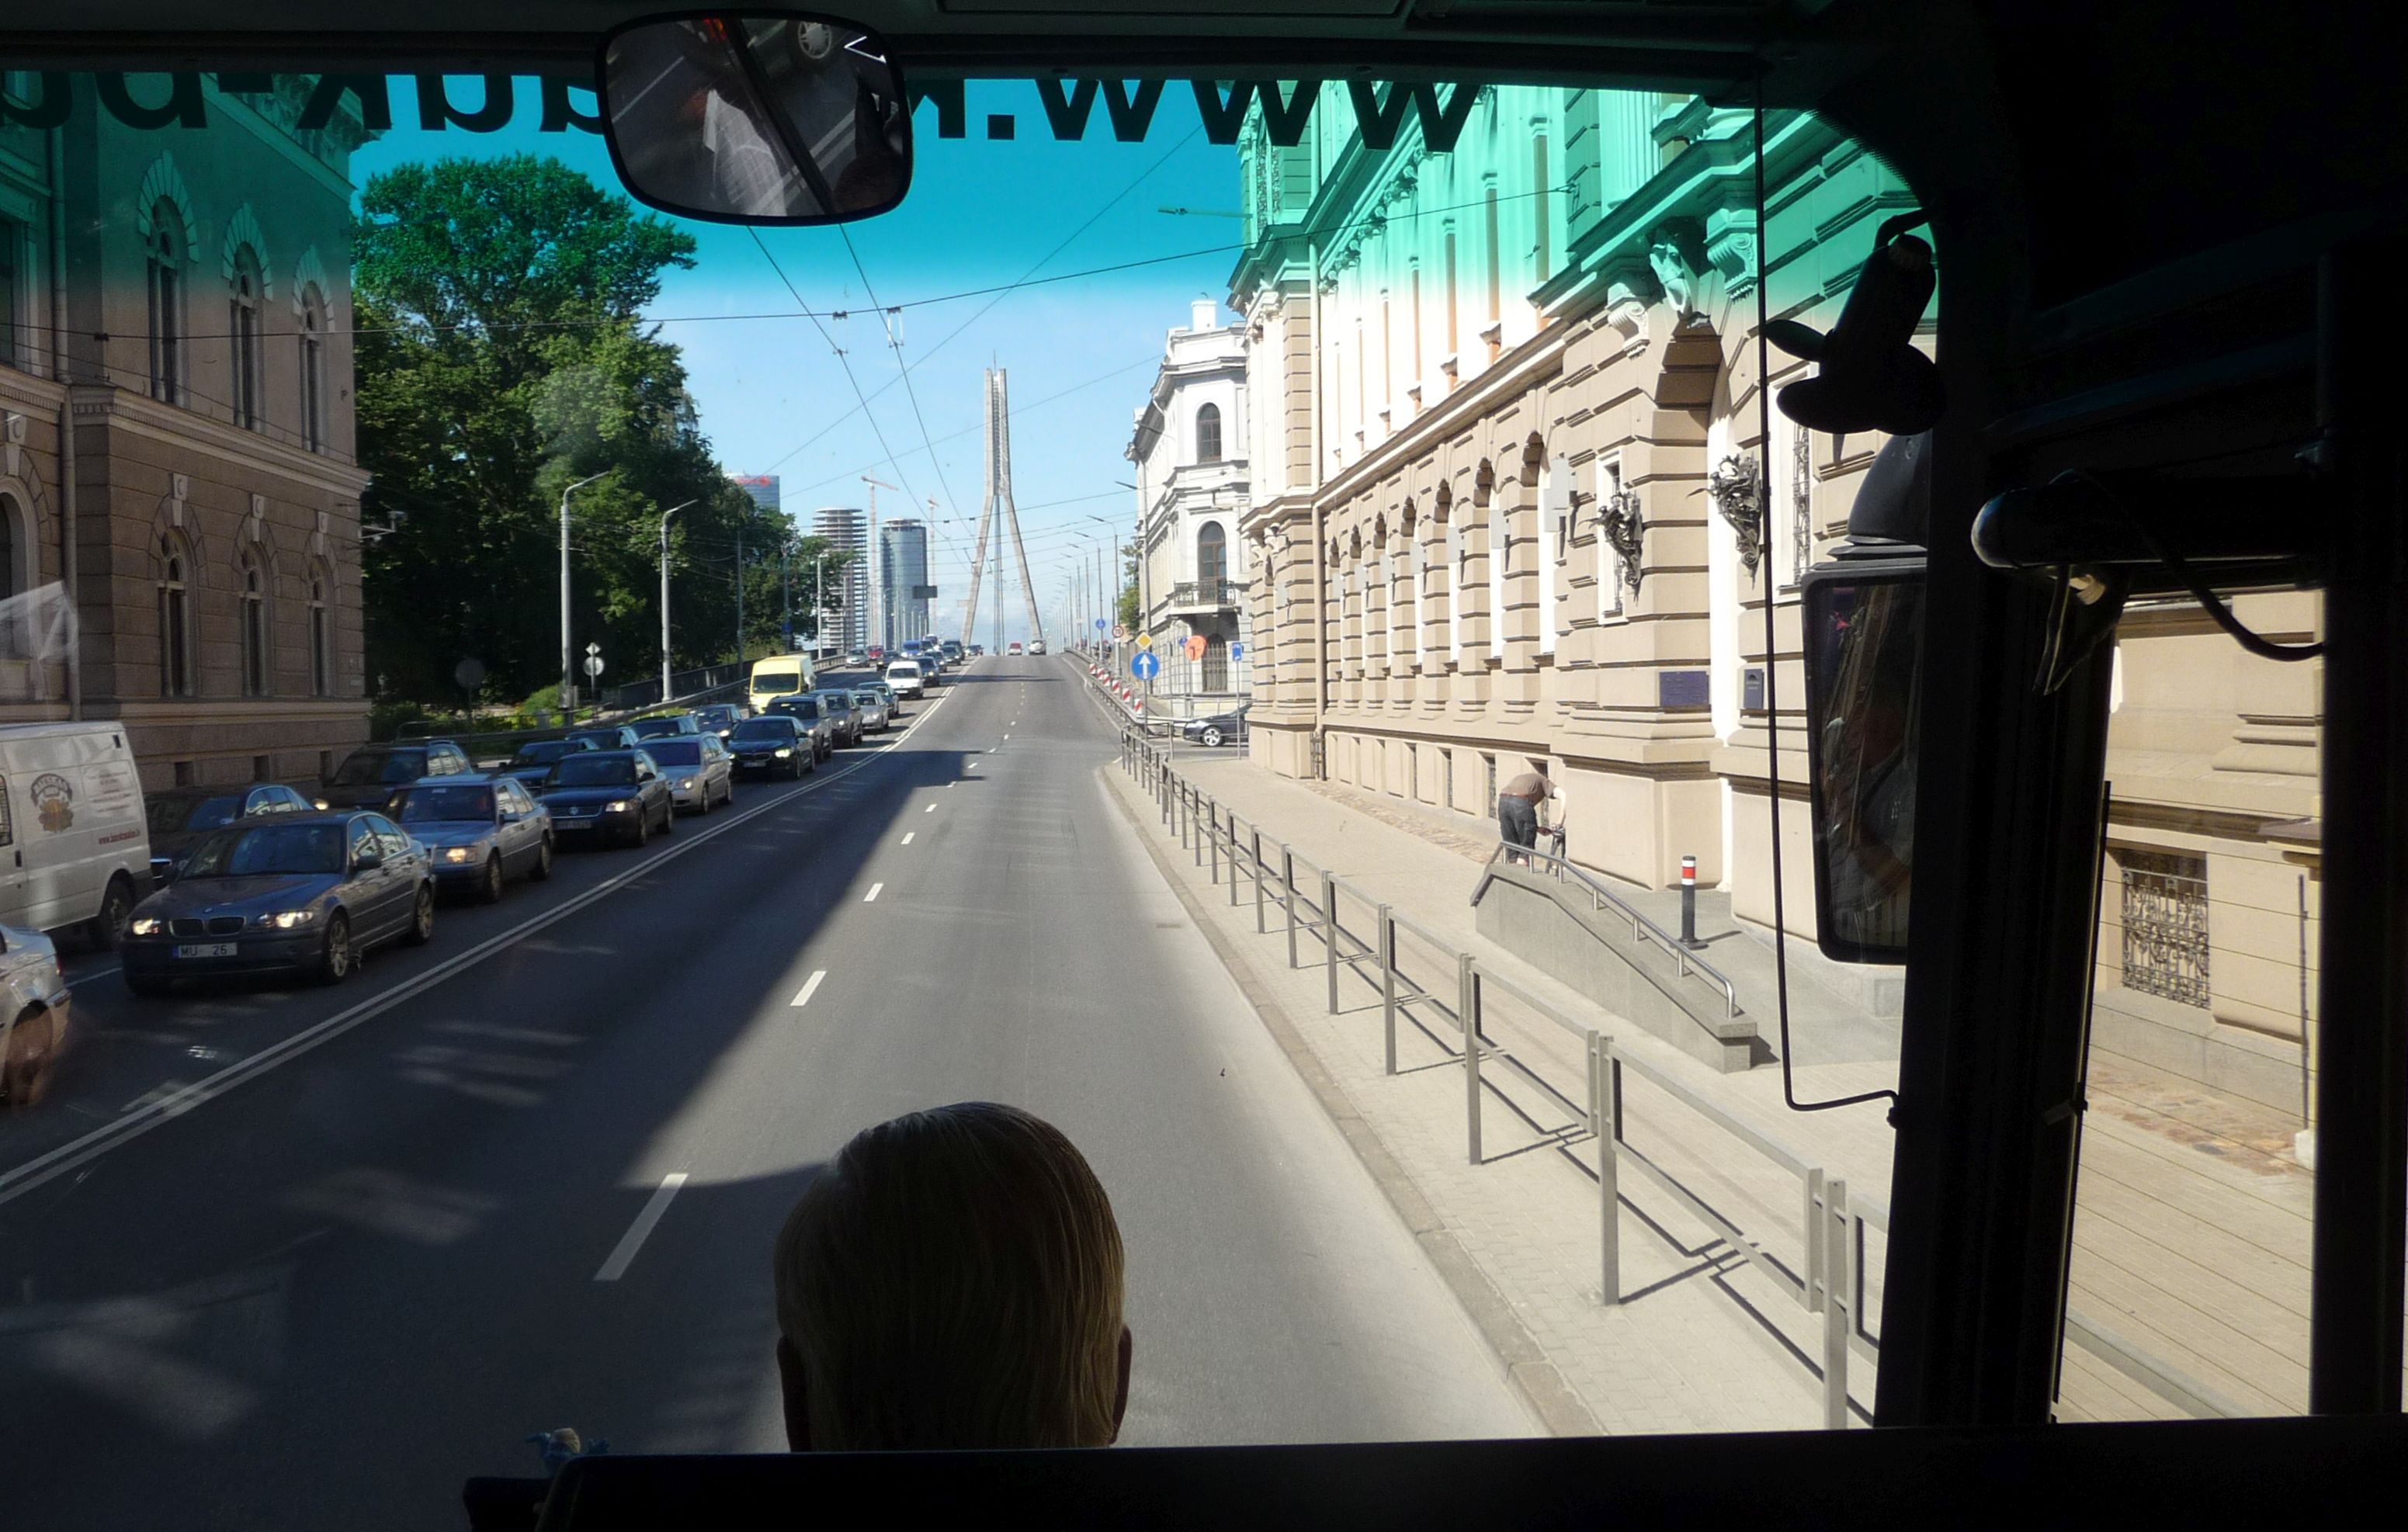 On the bus in Riga